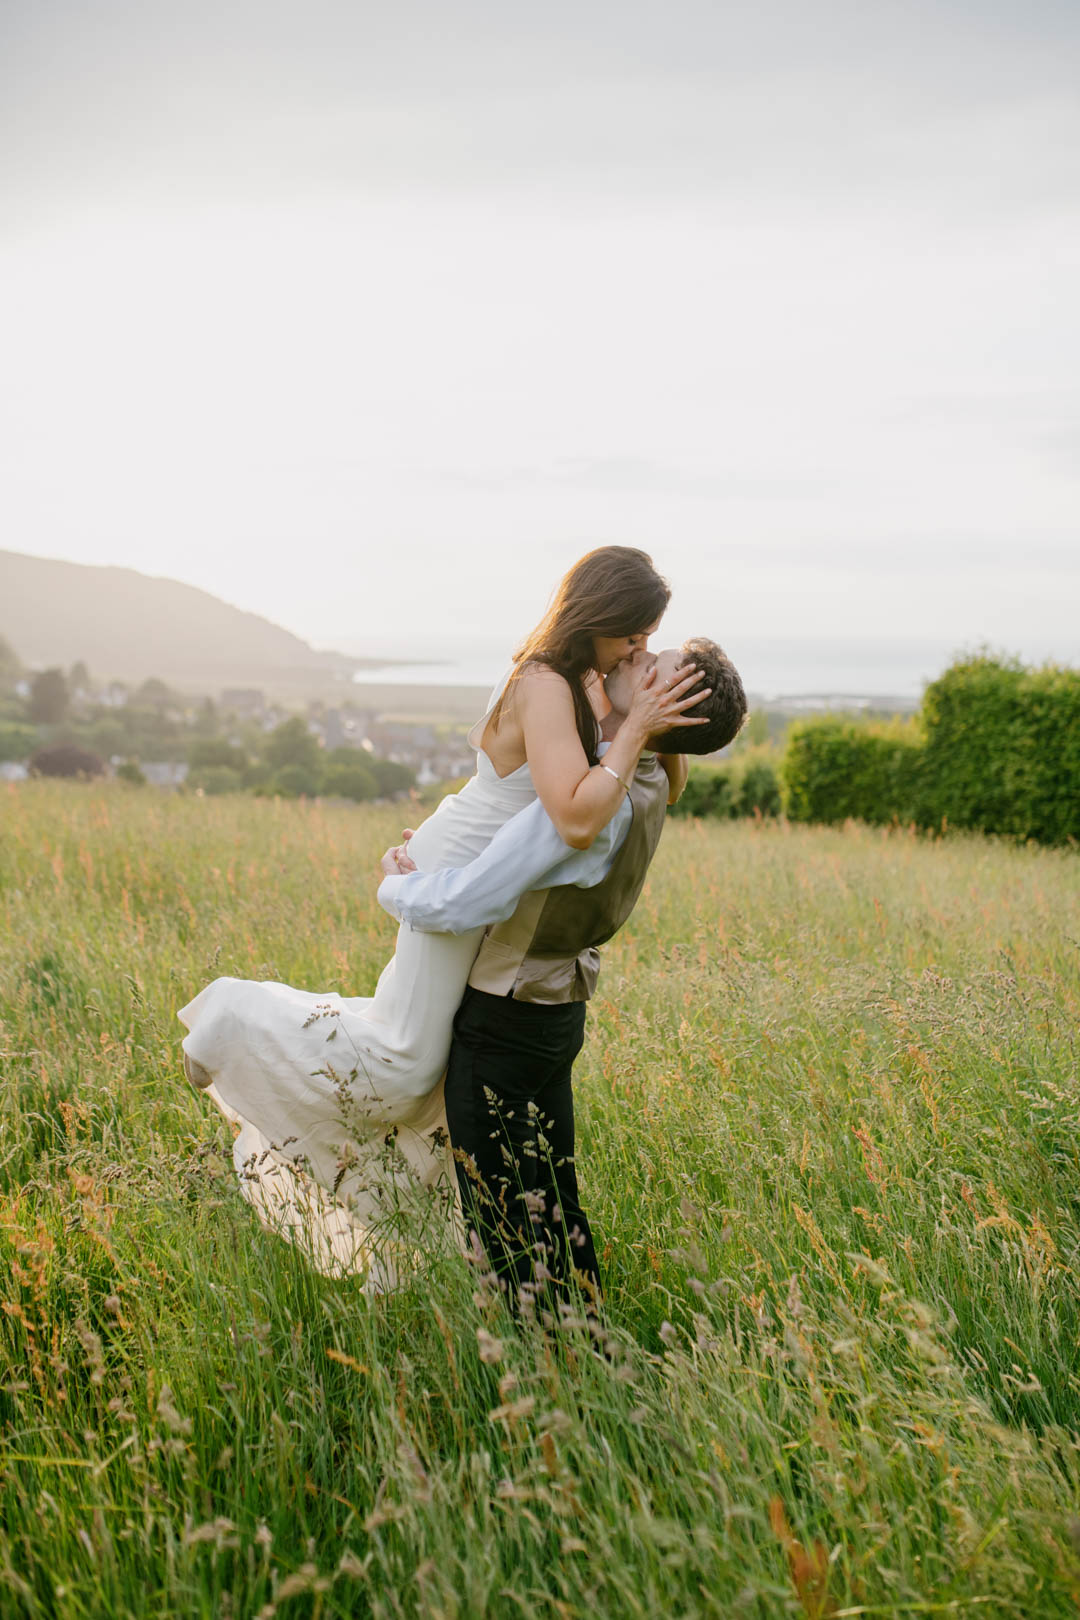 groom lifting up bride in meadow kissing her during day time